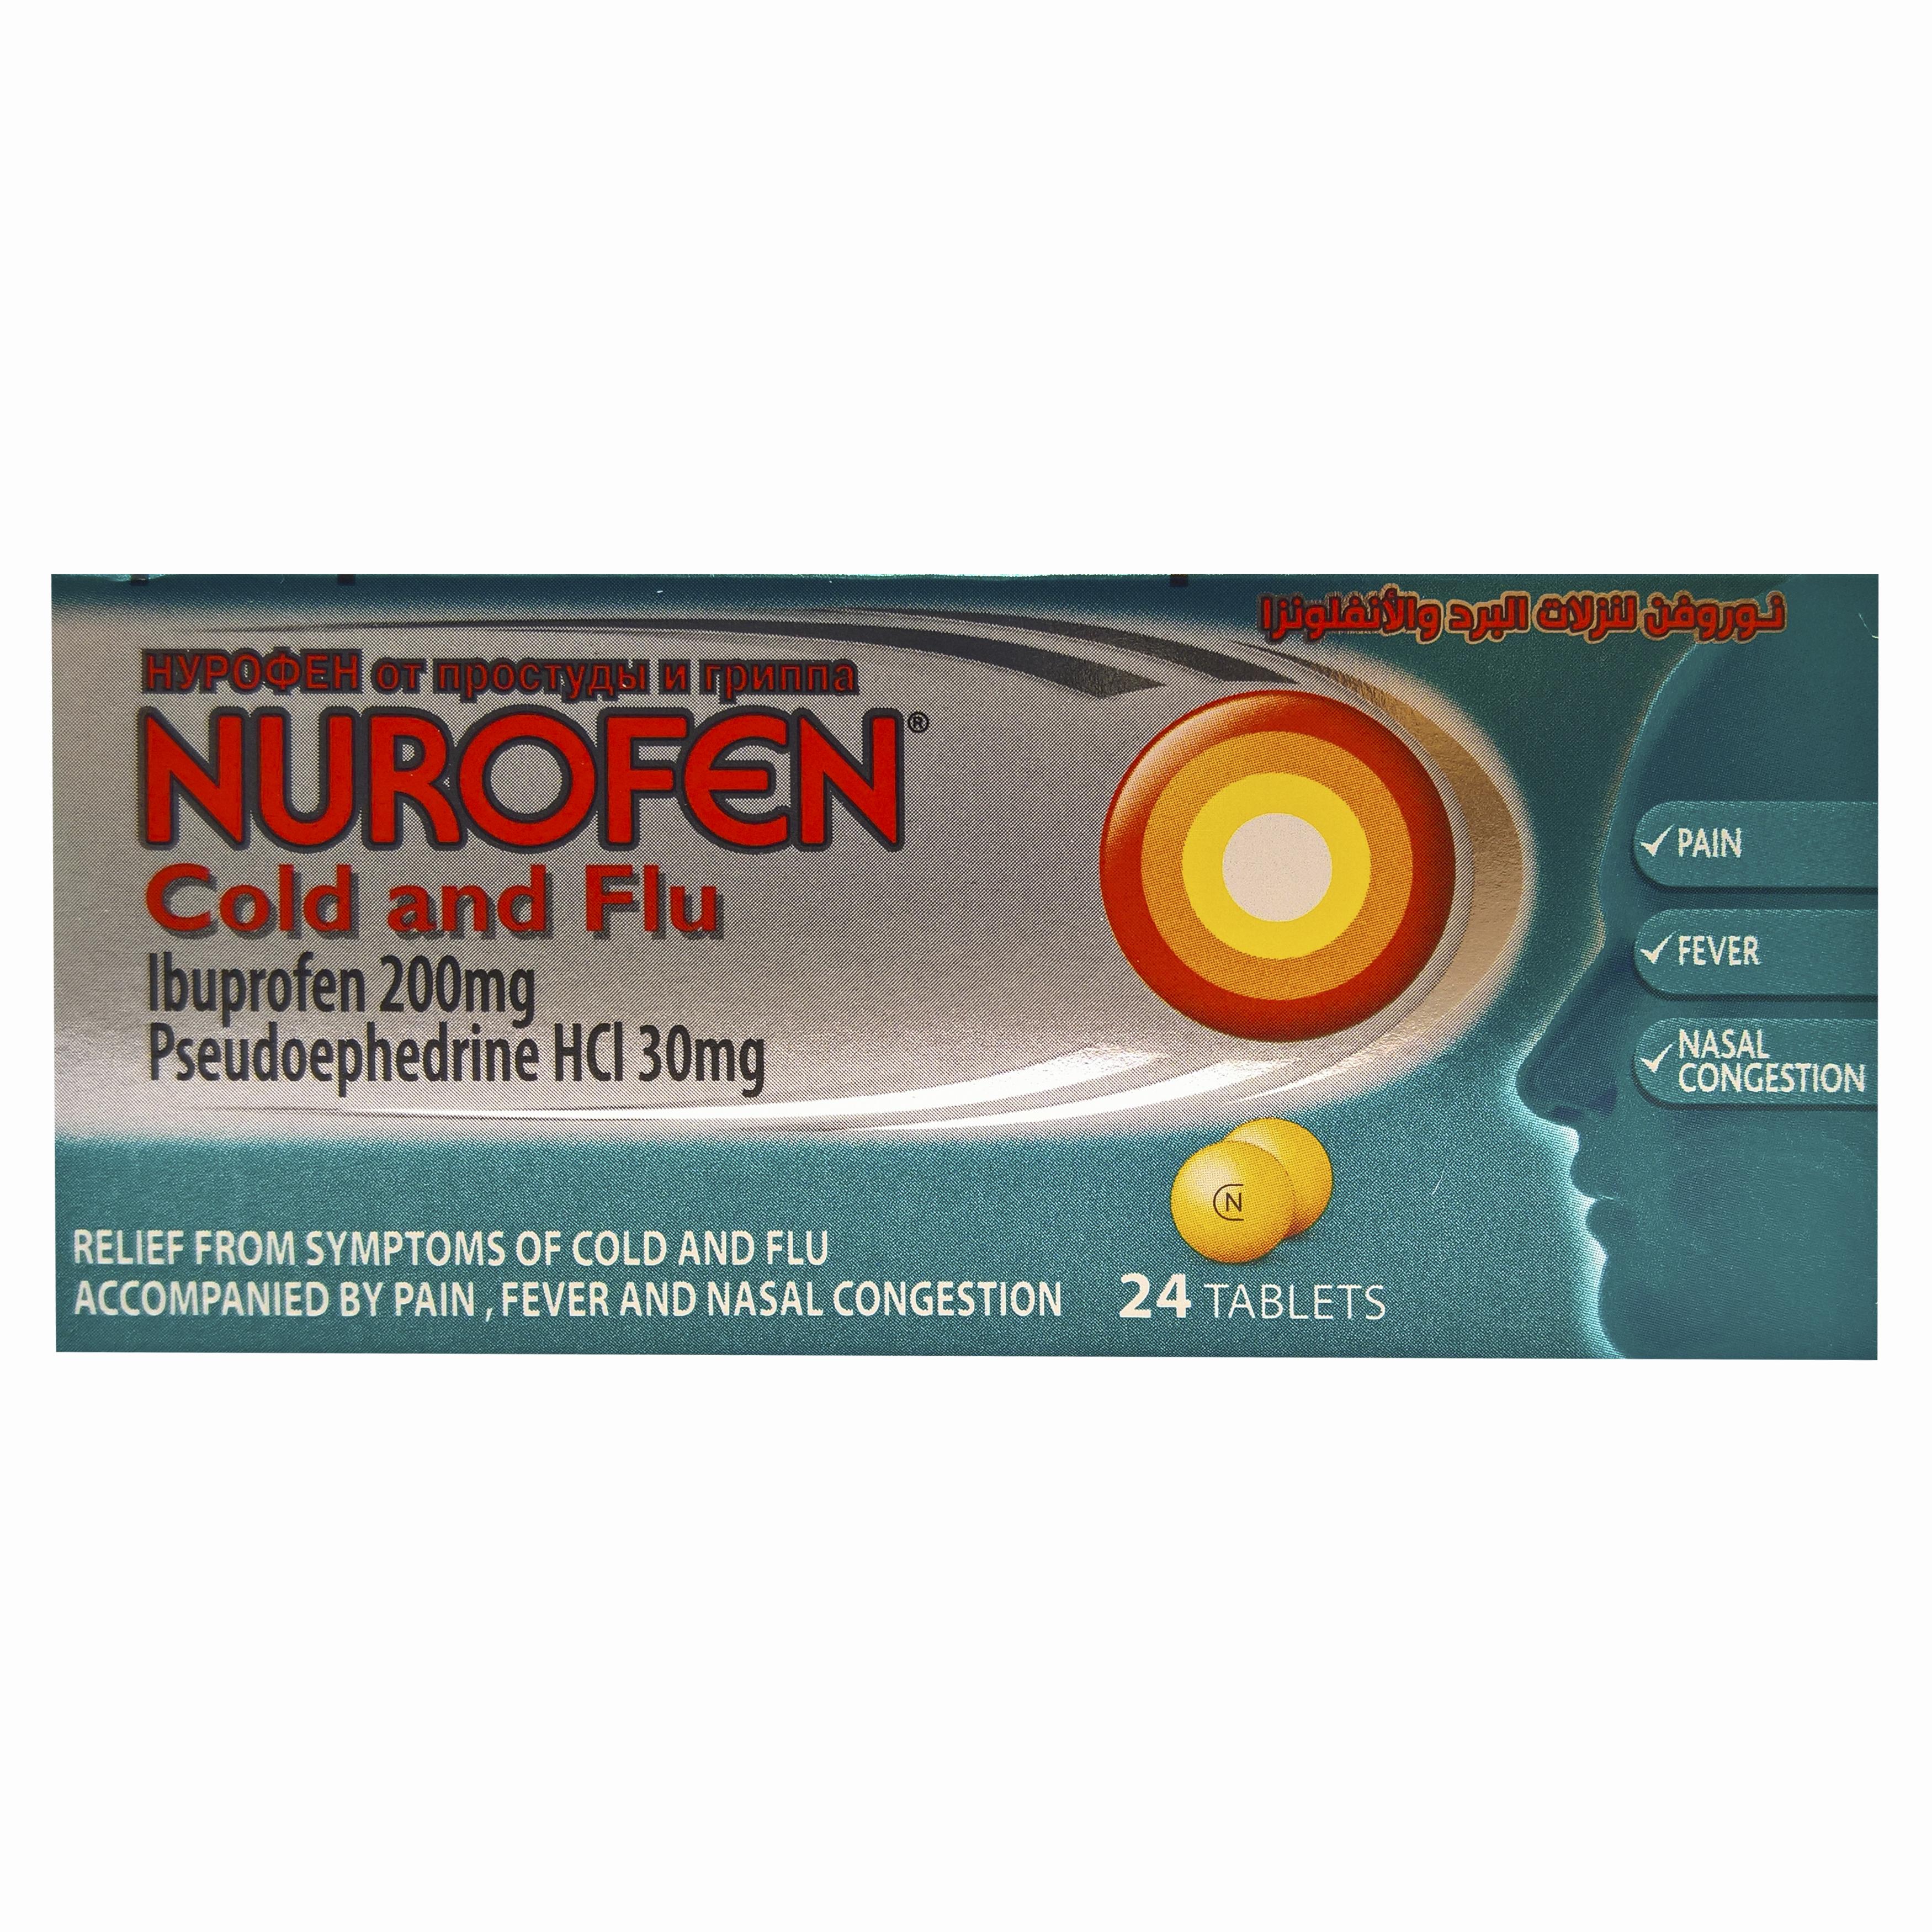 A box of Nurofen Cold and Flu tablets, a medication for relief from symptoms of cold and flu accompanied by pain, fever and nasal congestion.